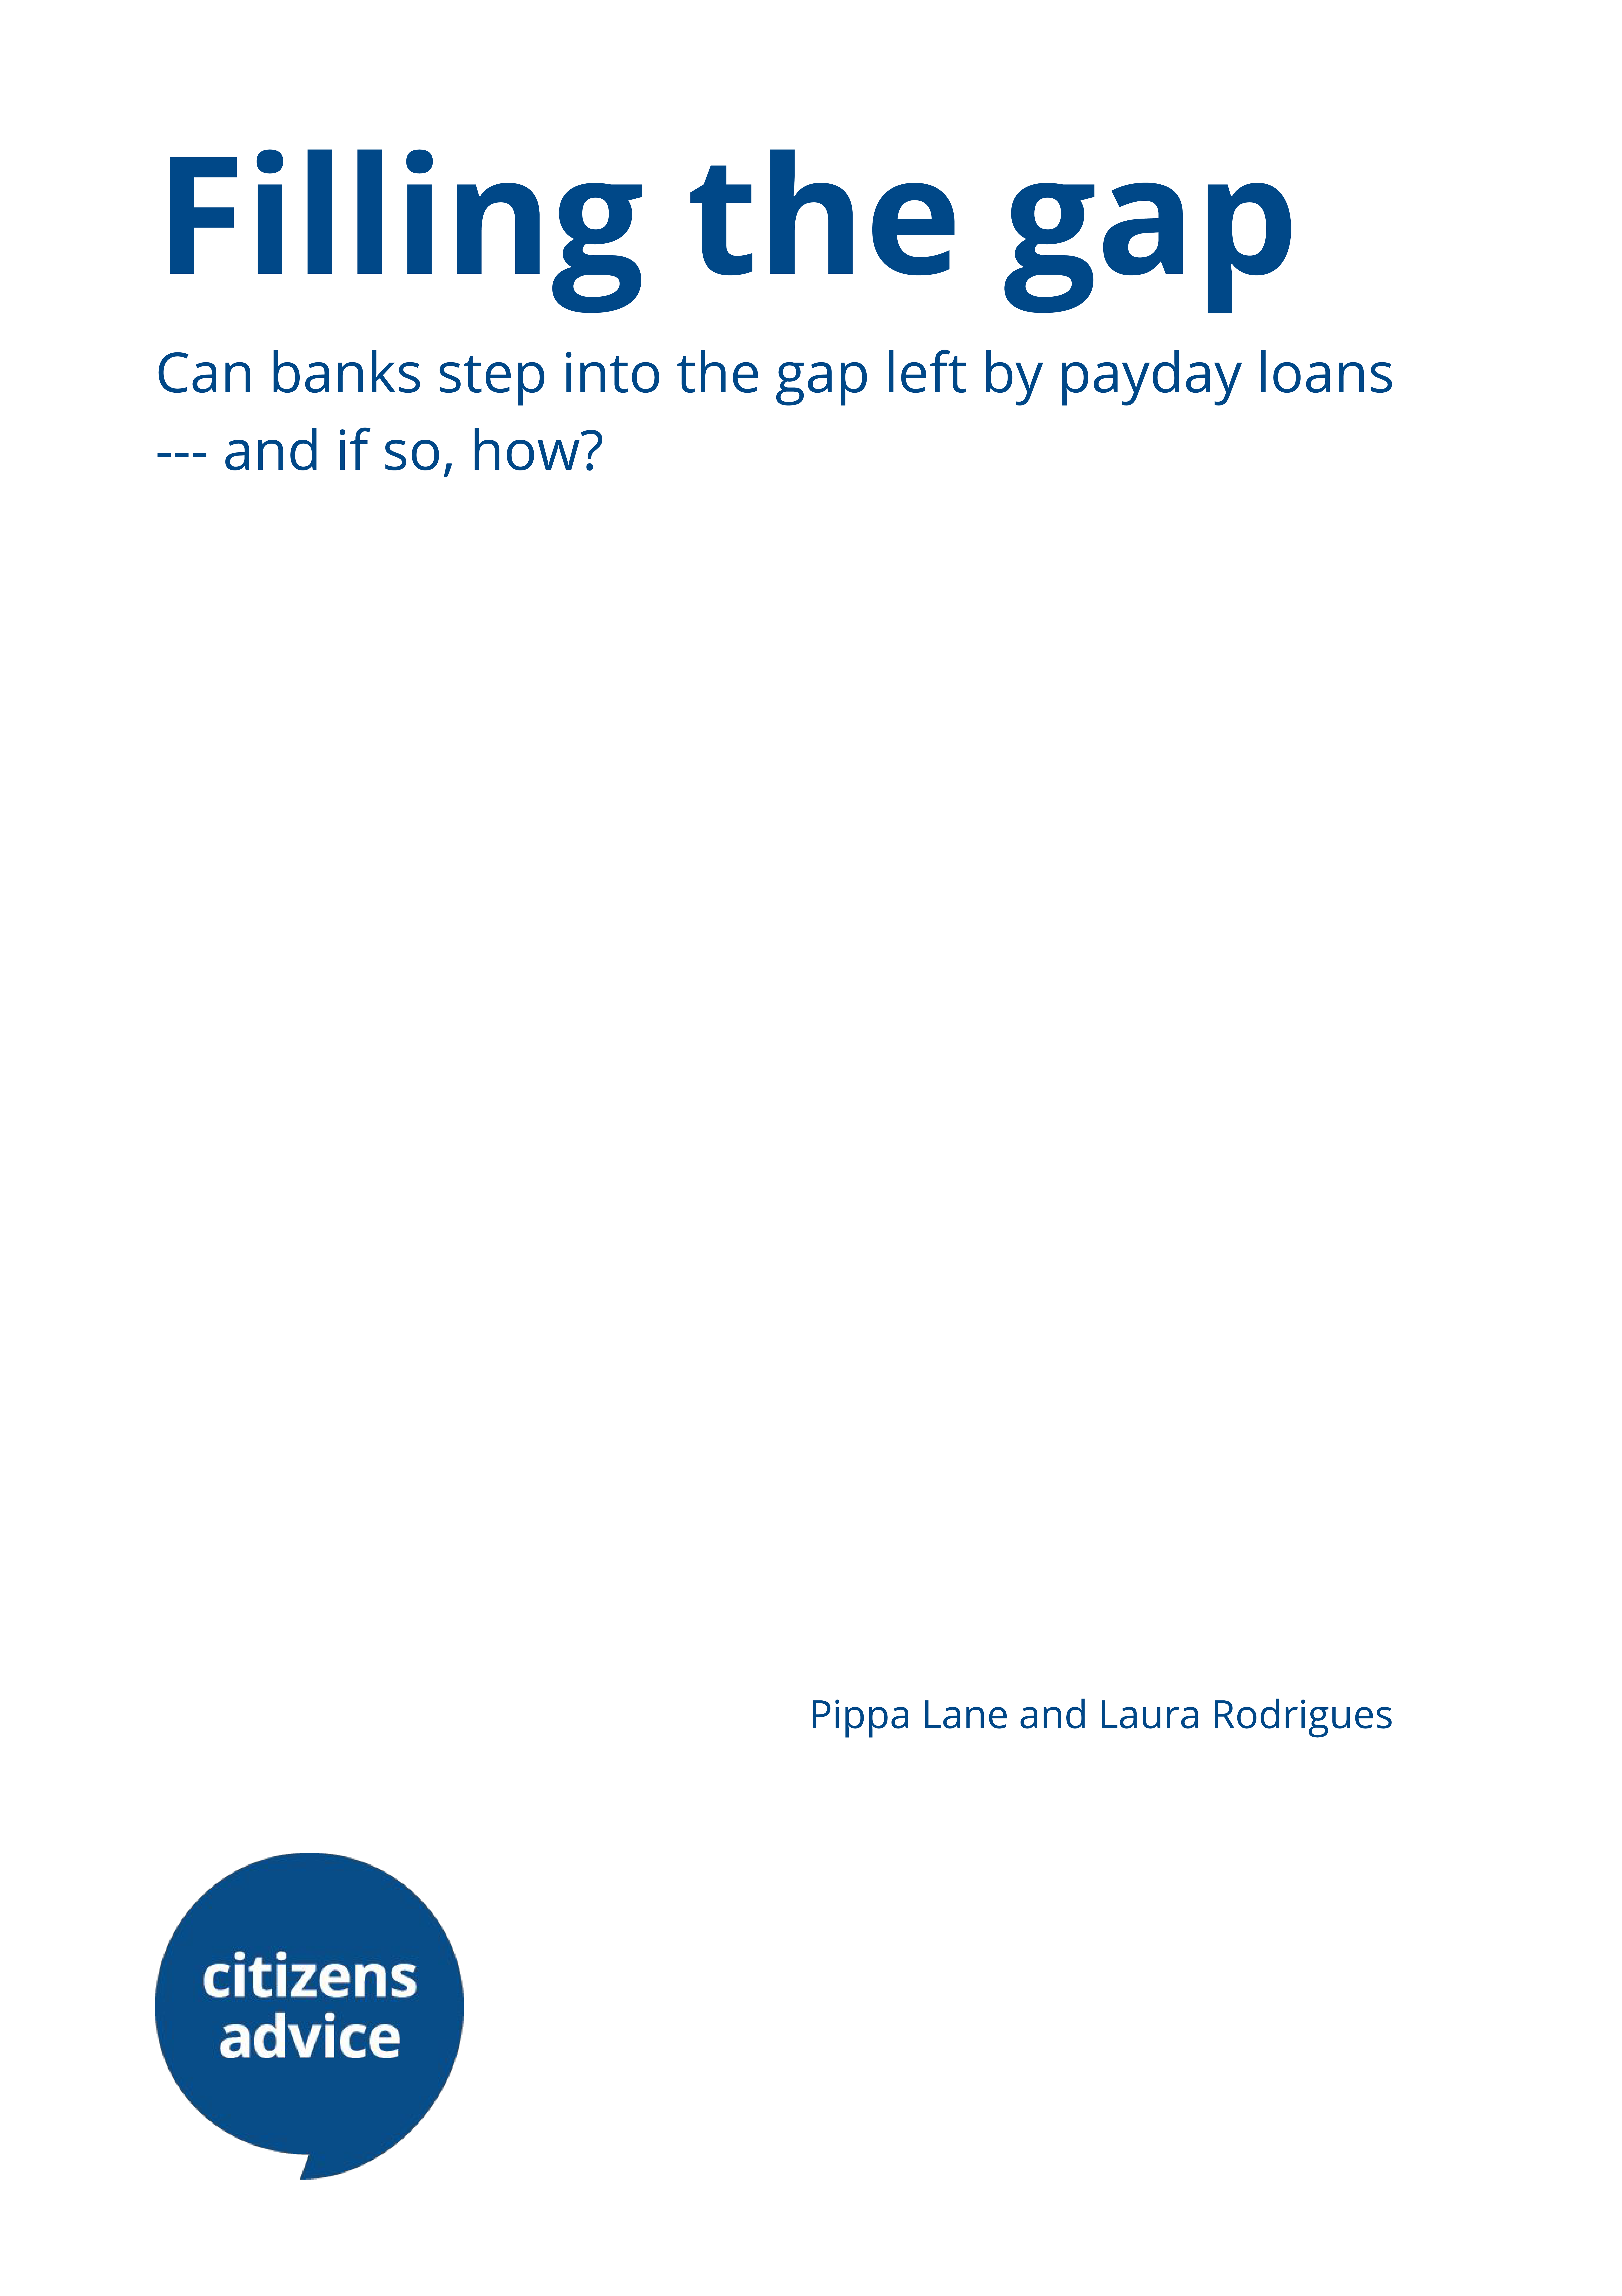 Cover to Citizens Advice Report "Filling the Gap"